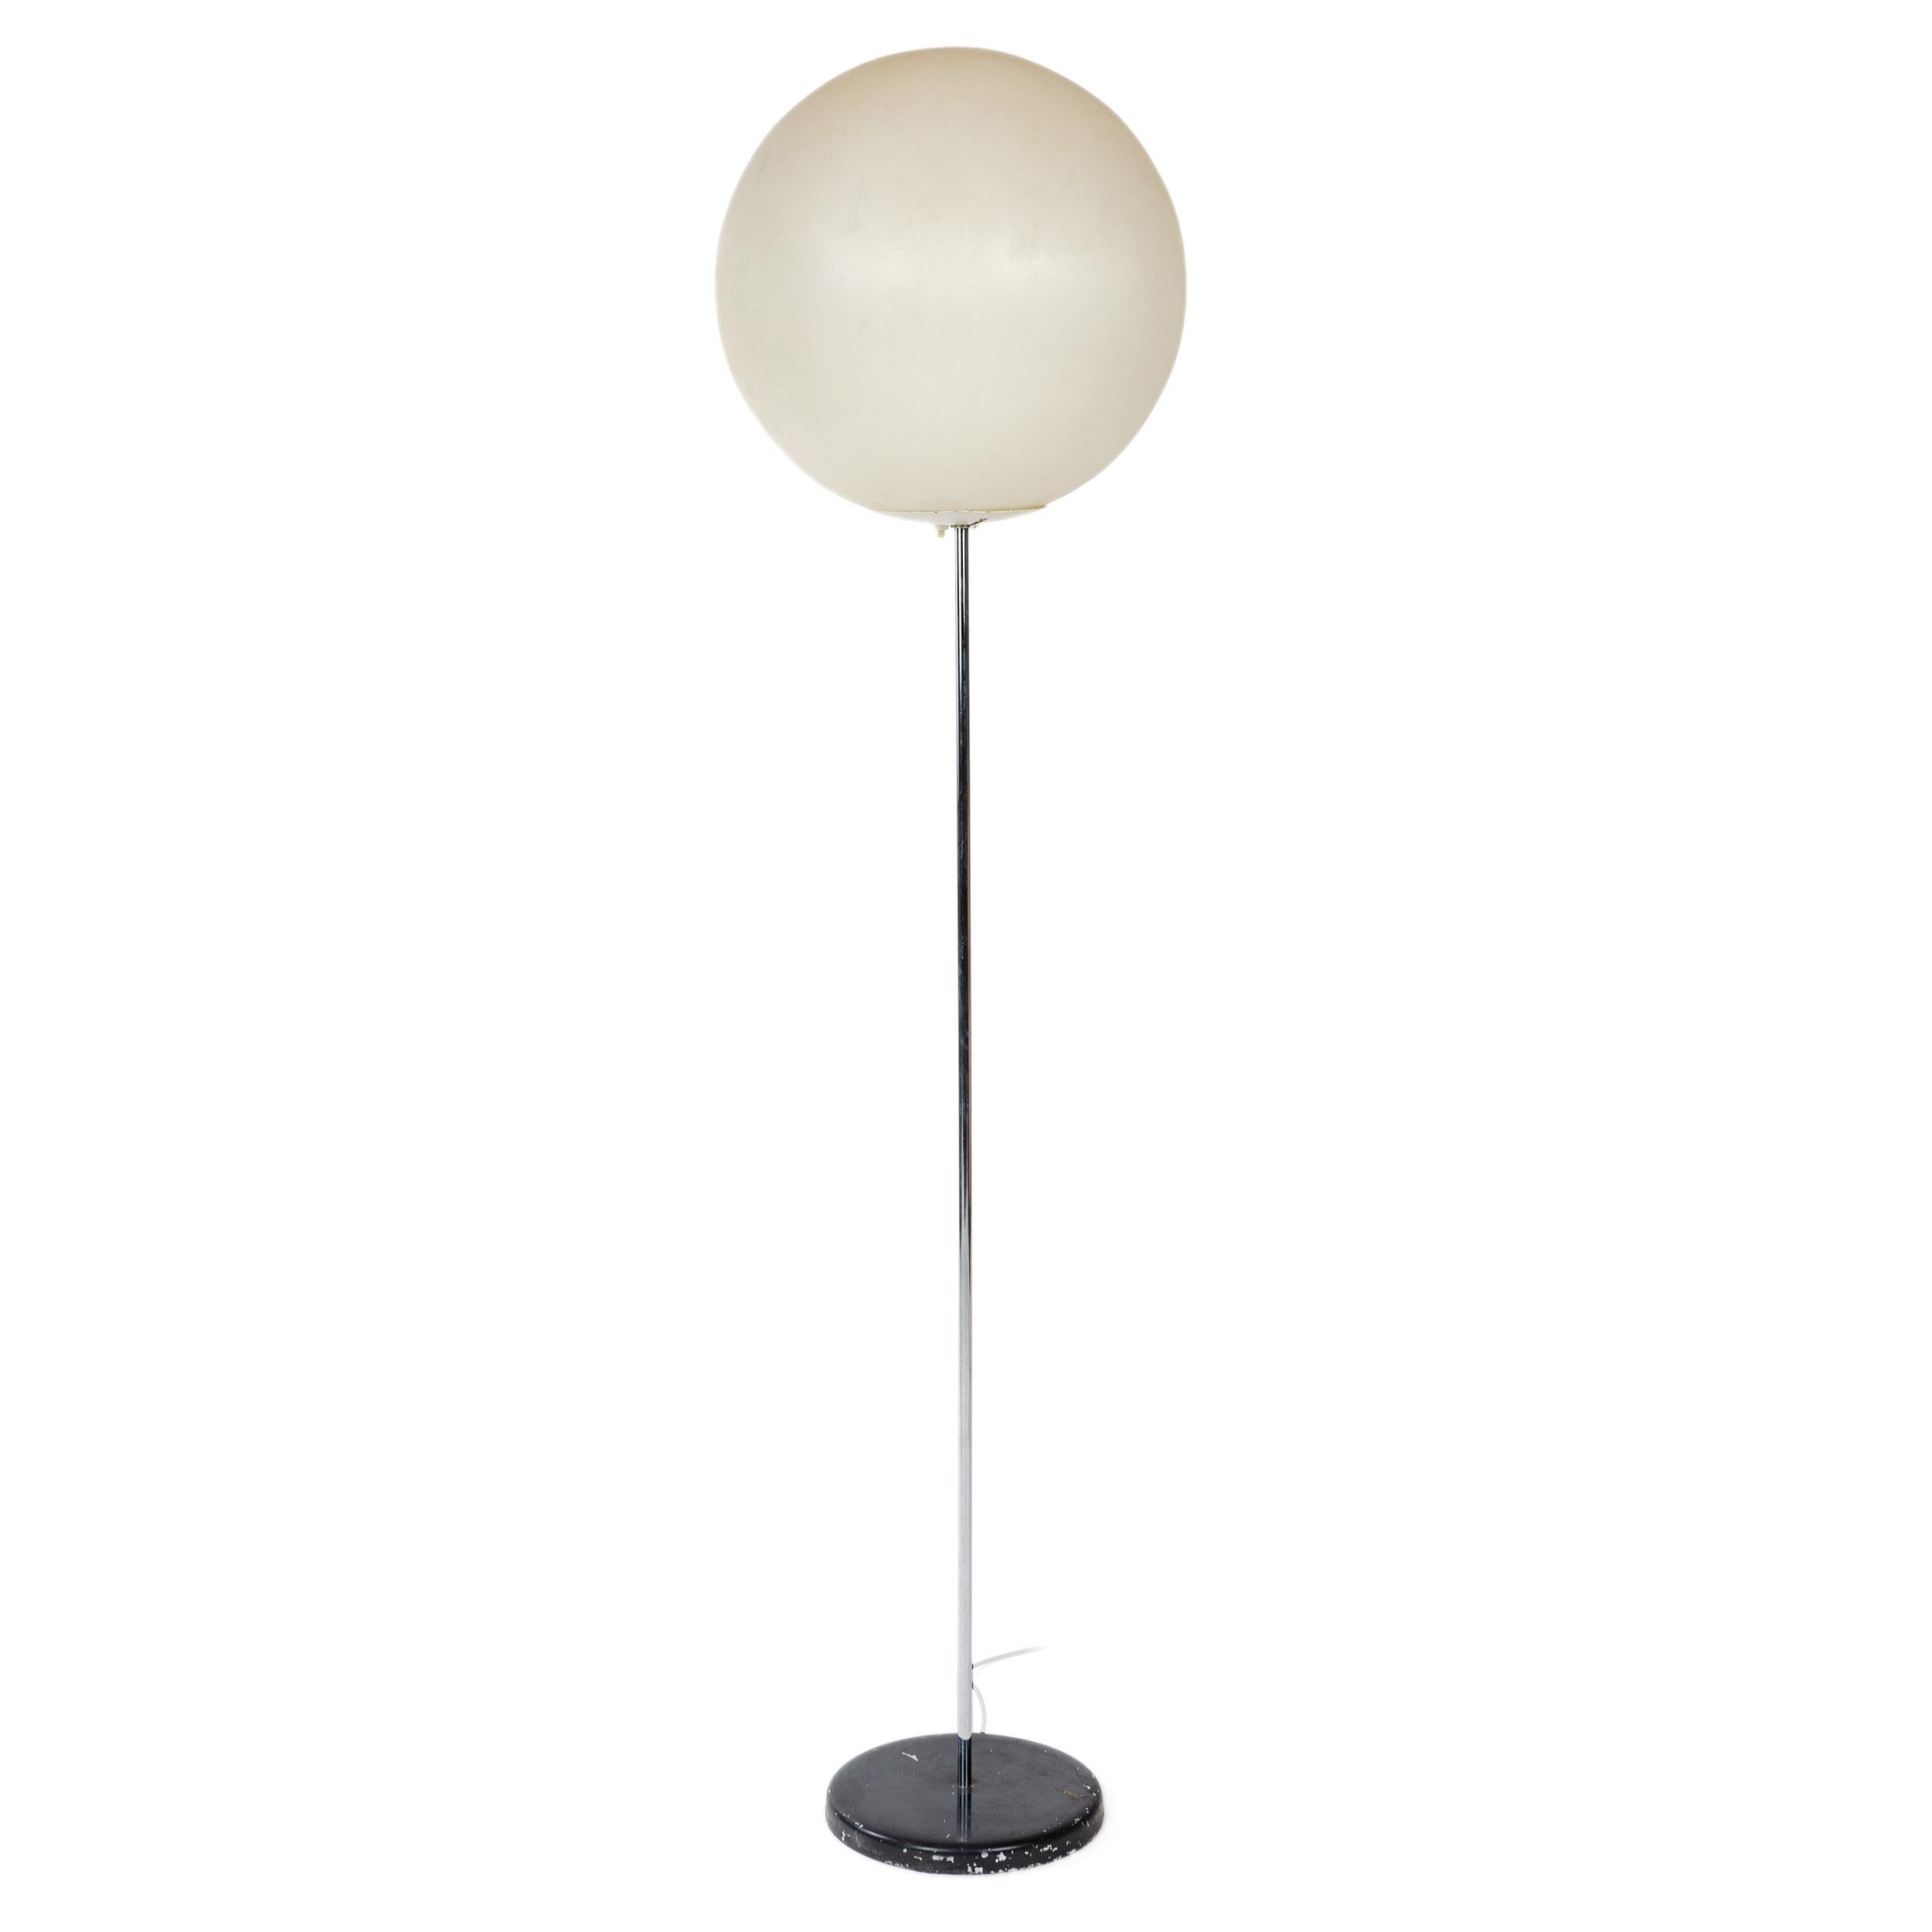 Minimalist floor lamp of geometric shapes-two circles and a straight line. Translucent plastic globe atop a vertical chrome rod threaded in to chromed metal circle painted black.